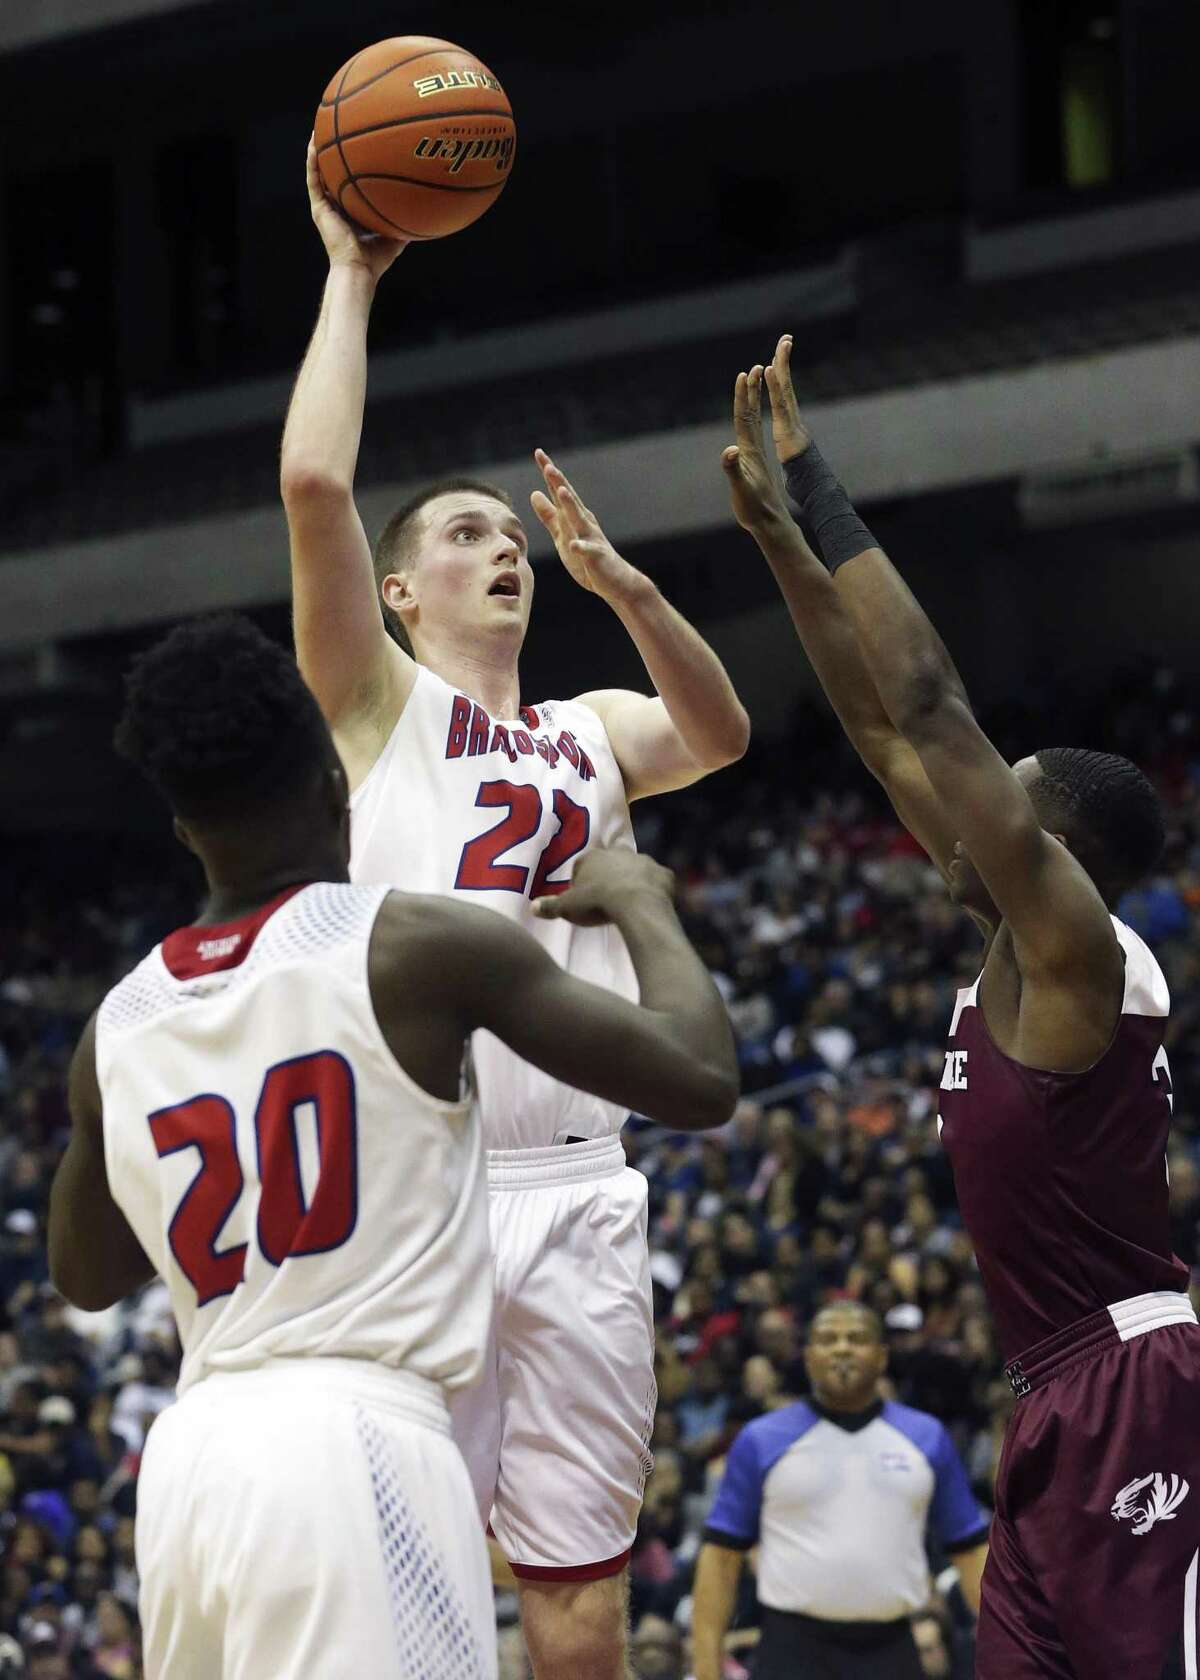 Hunter Quick puts up a jumper in the lane in the second half as his Brazosport Exporters fight to stay in the game against Silsbee in the state championship basketball game for class 4A boys at the Alamodome on March 11, 2017.